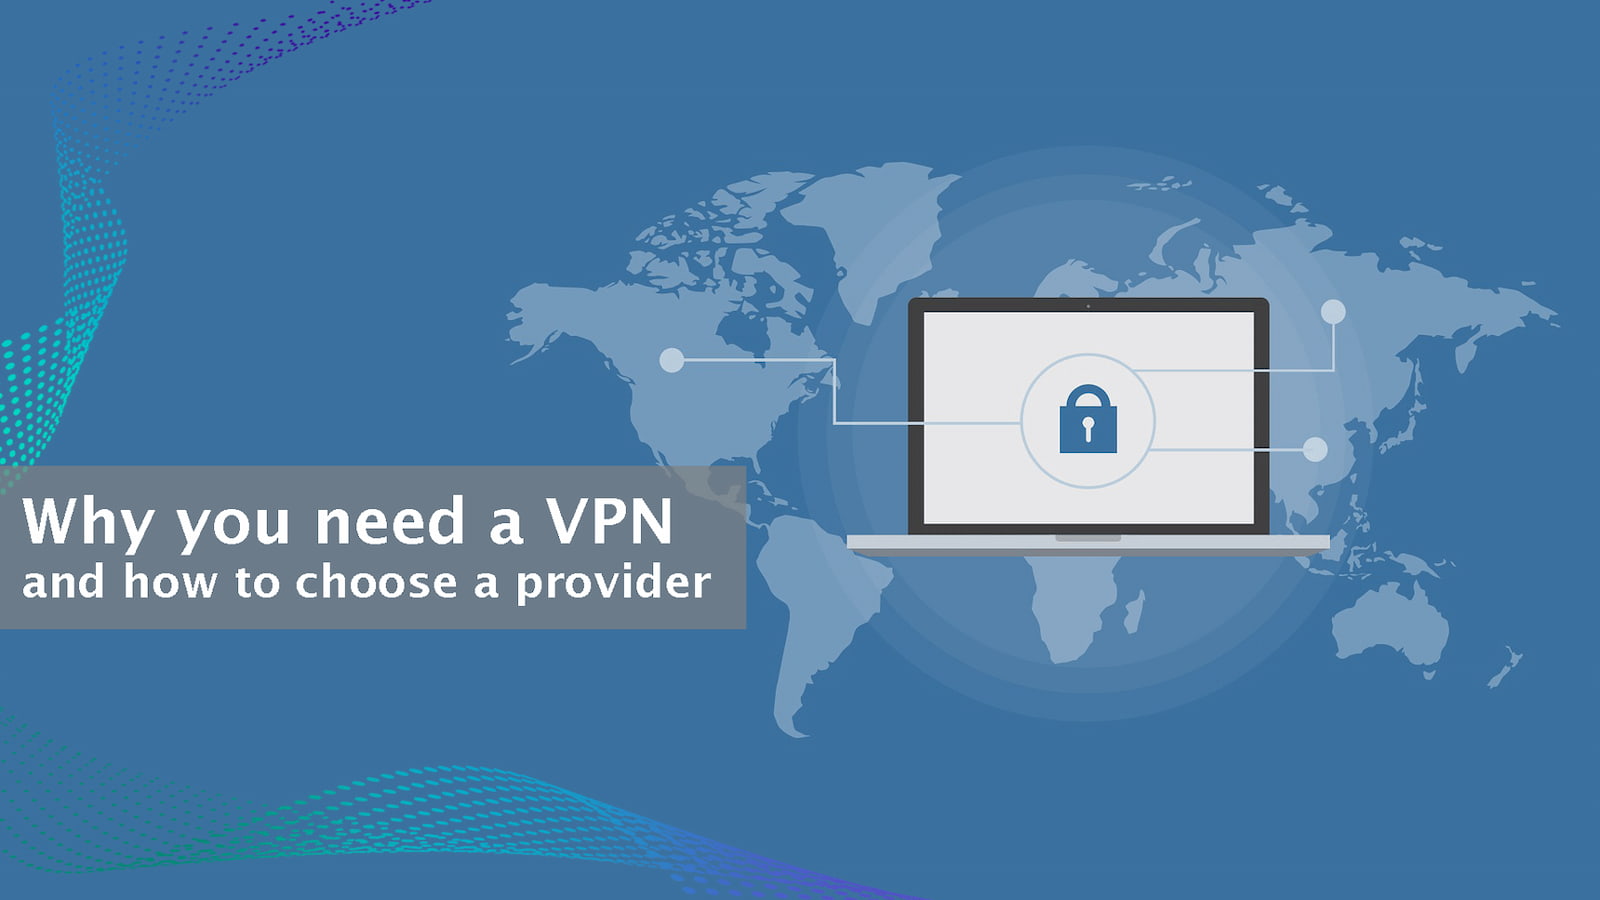 The importance of VPN and how to choose provider